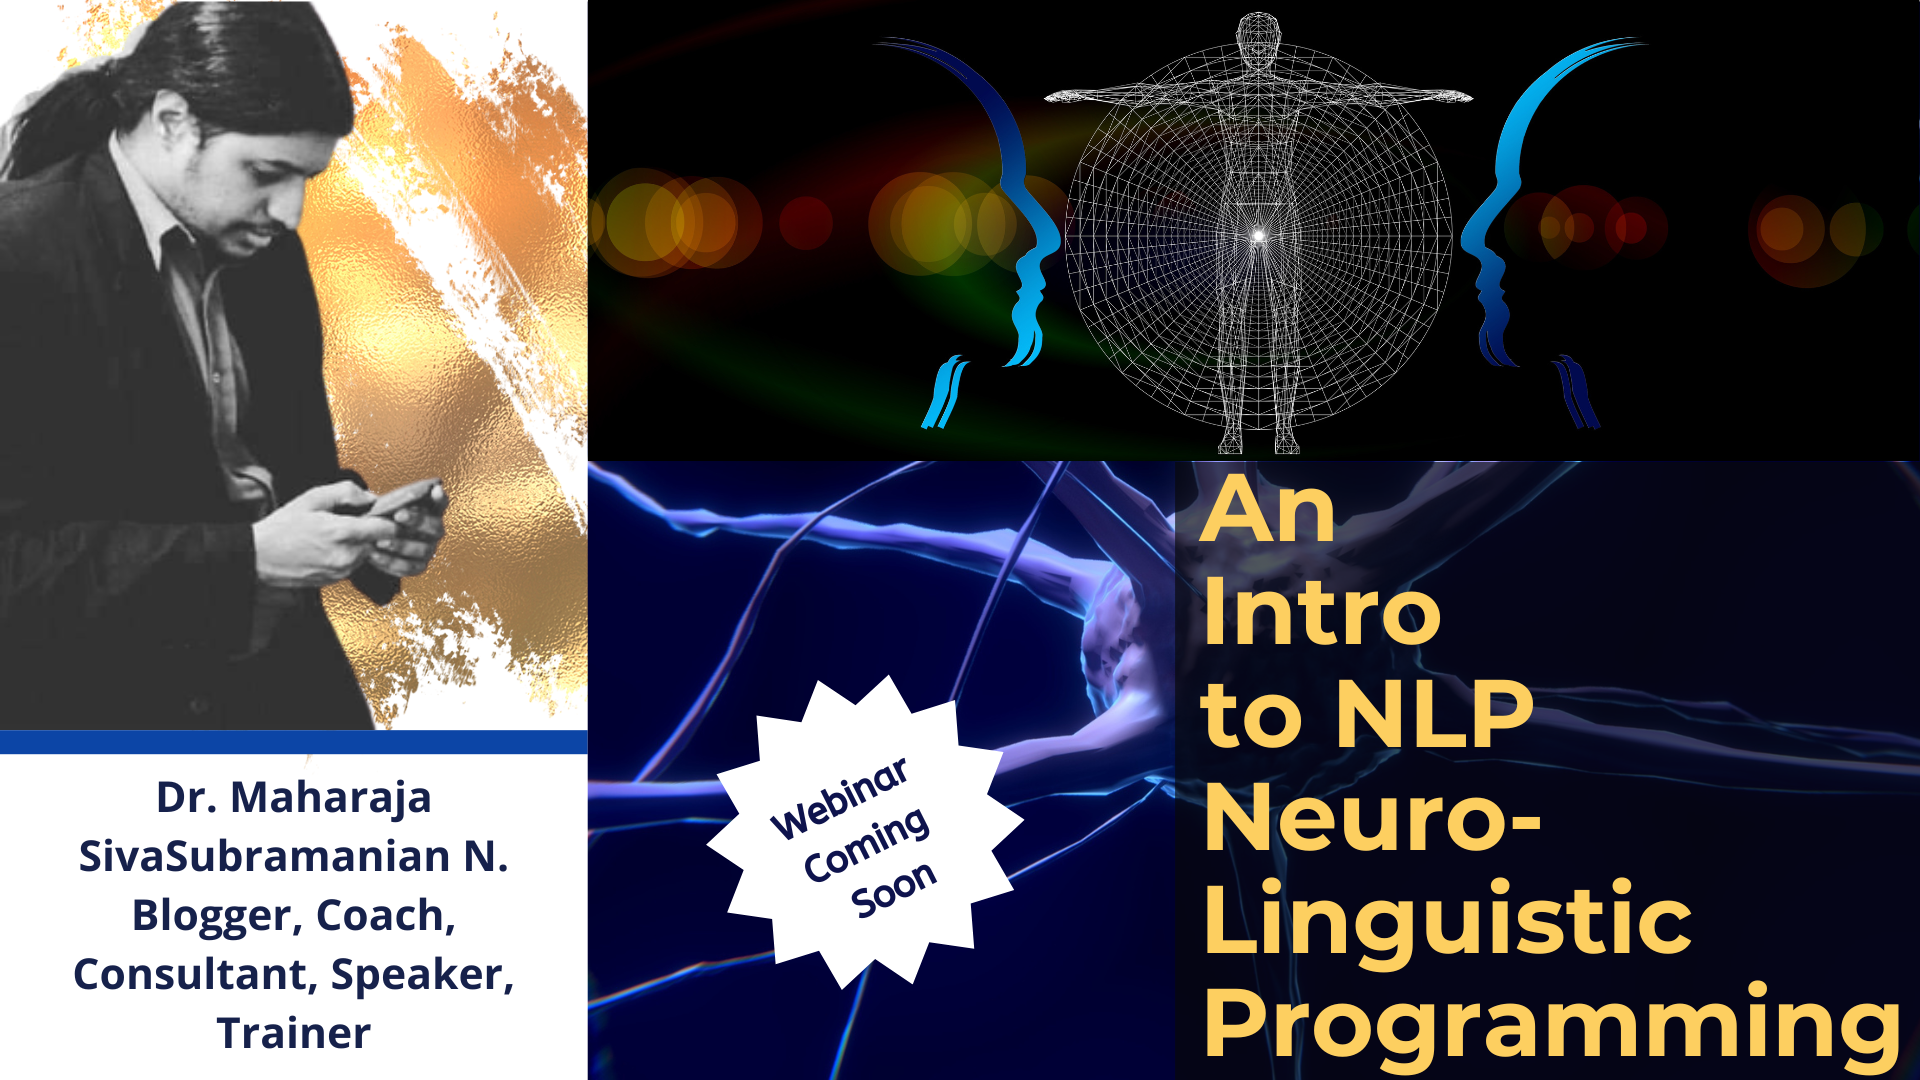 An Intro to NLP Neuro-Linguistic Programming. – Upcoming free webinar.